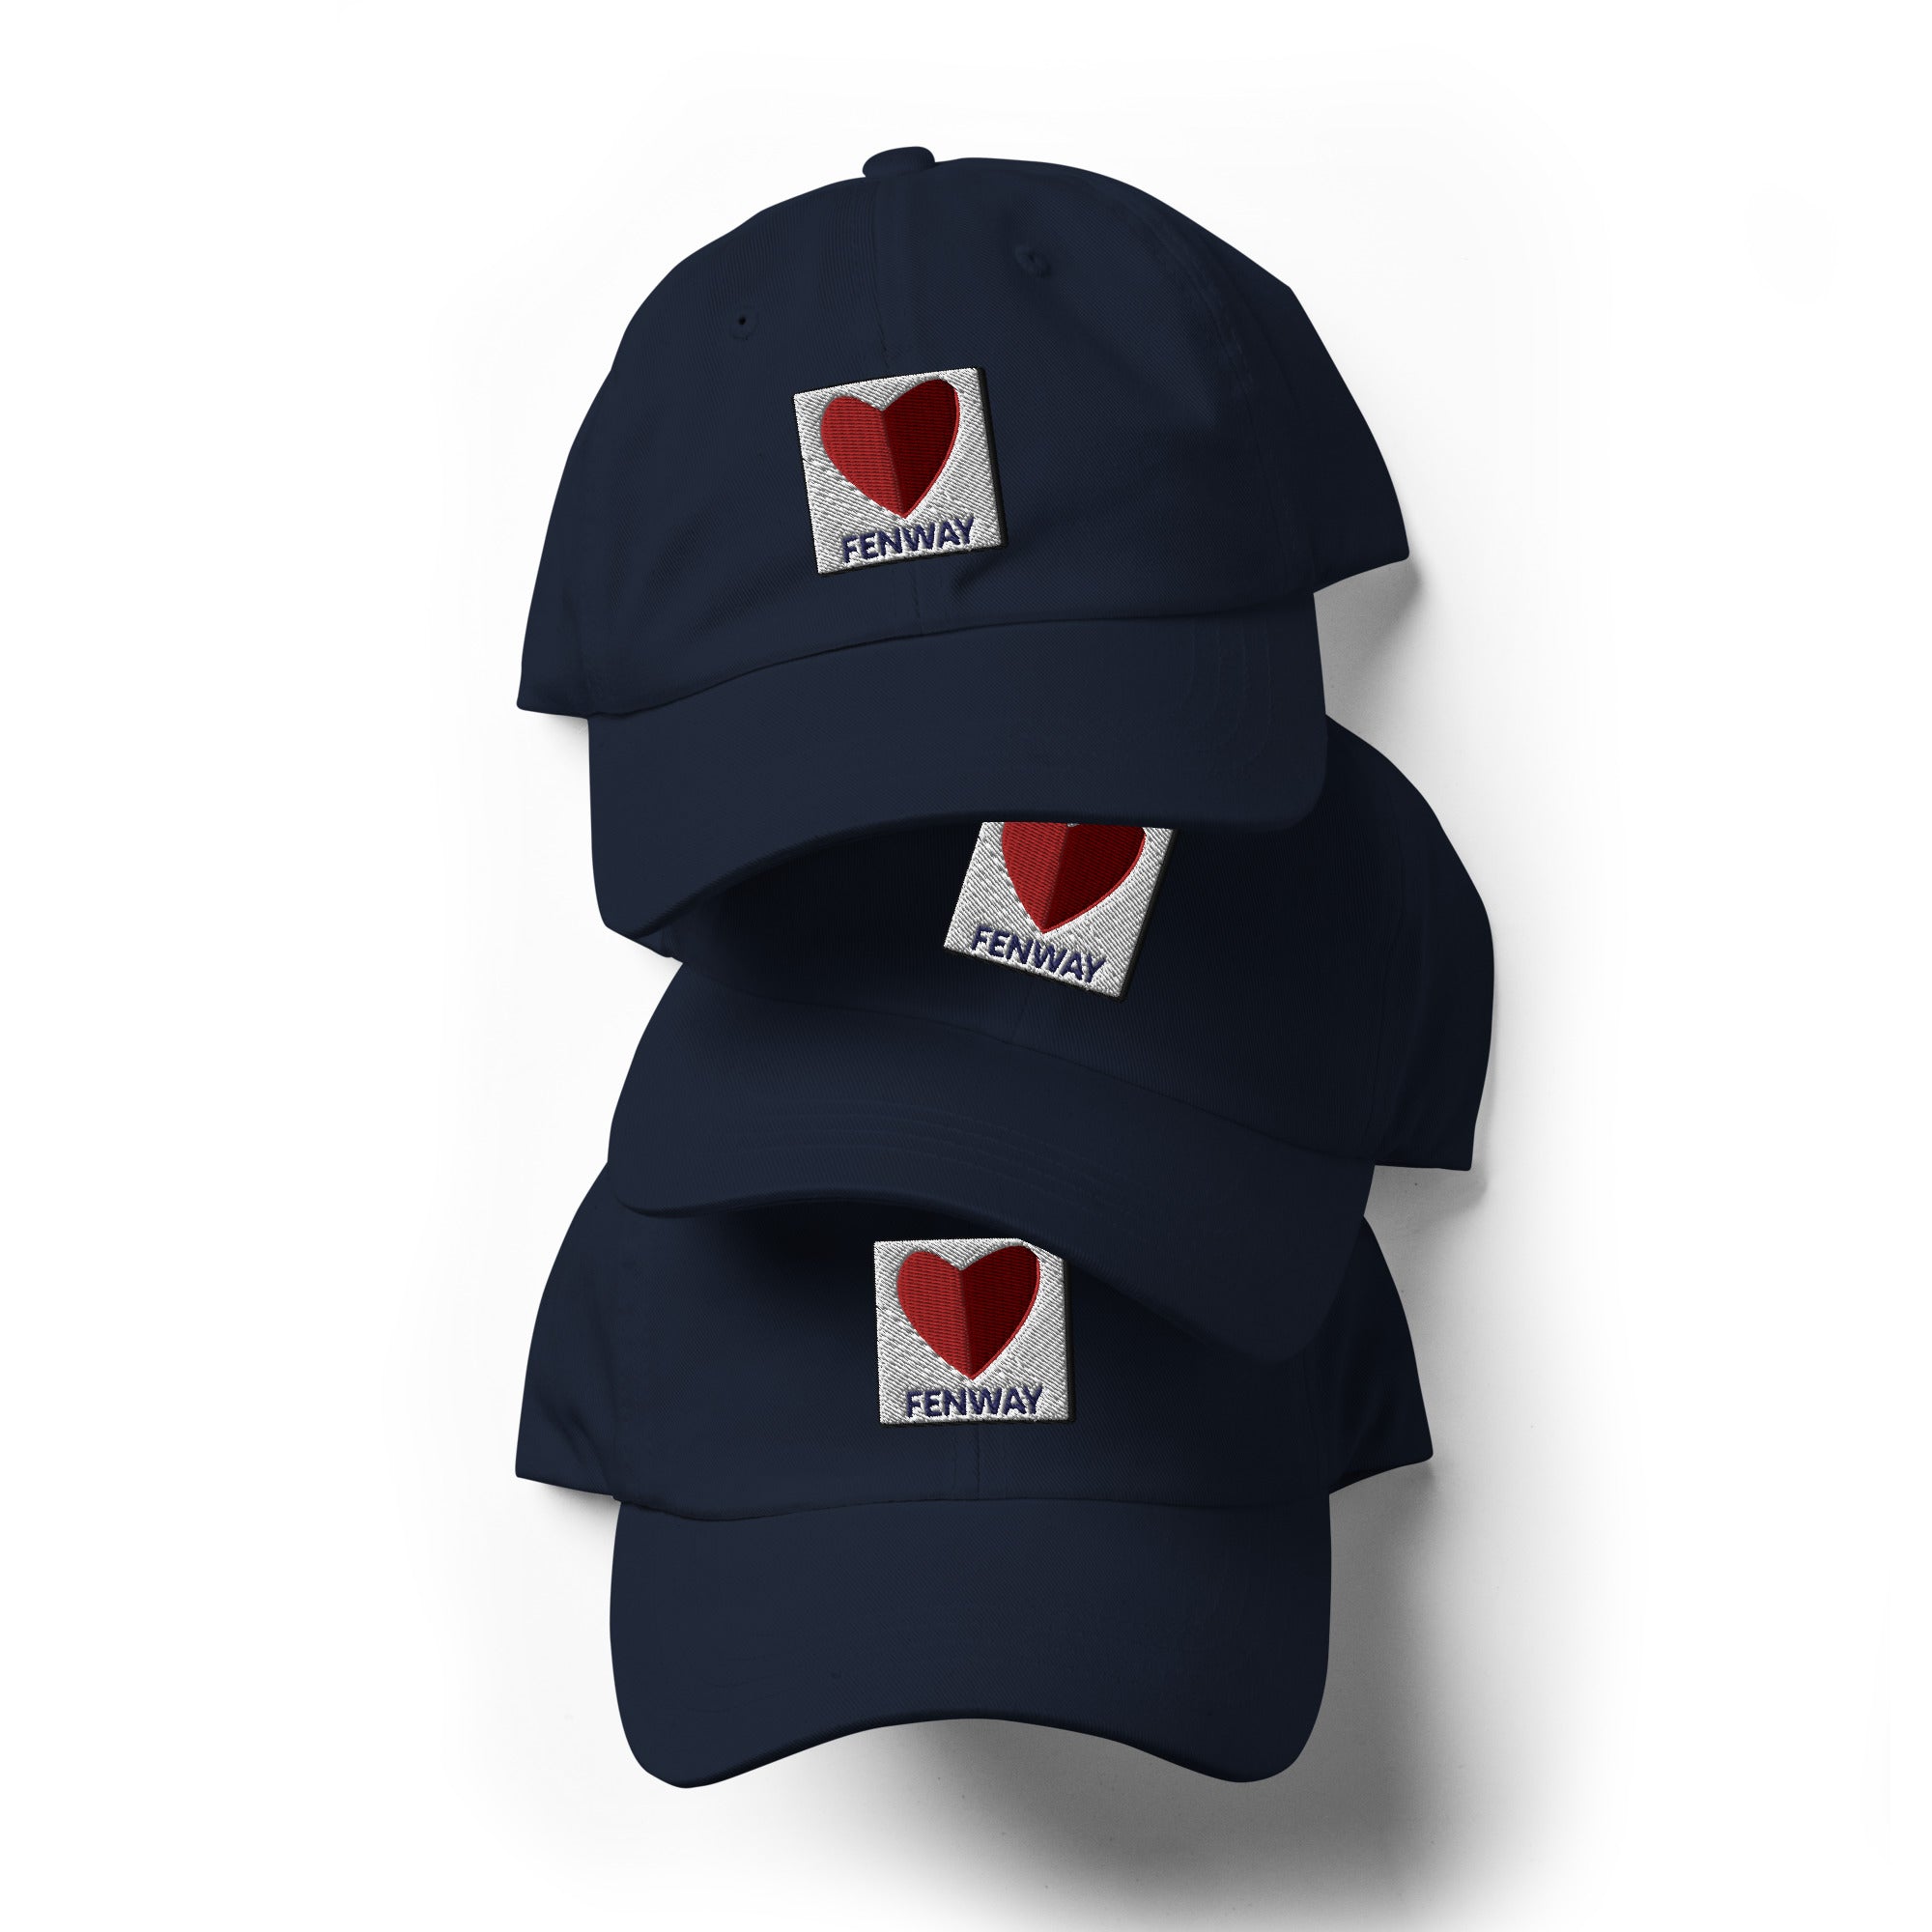 graphic of the citgo sign boston fenway as a heart embroidered on 3 baseball hats